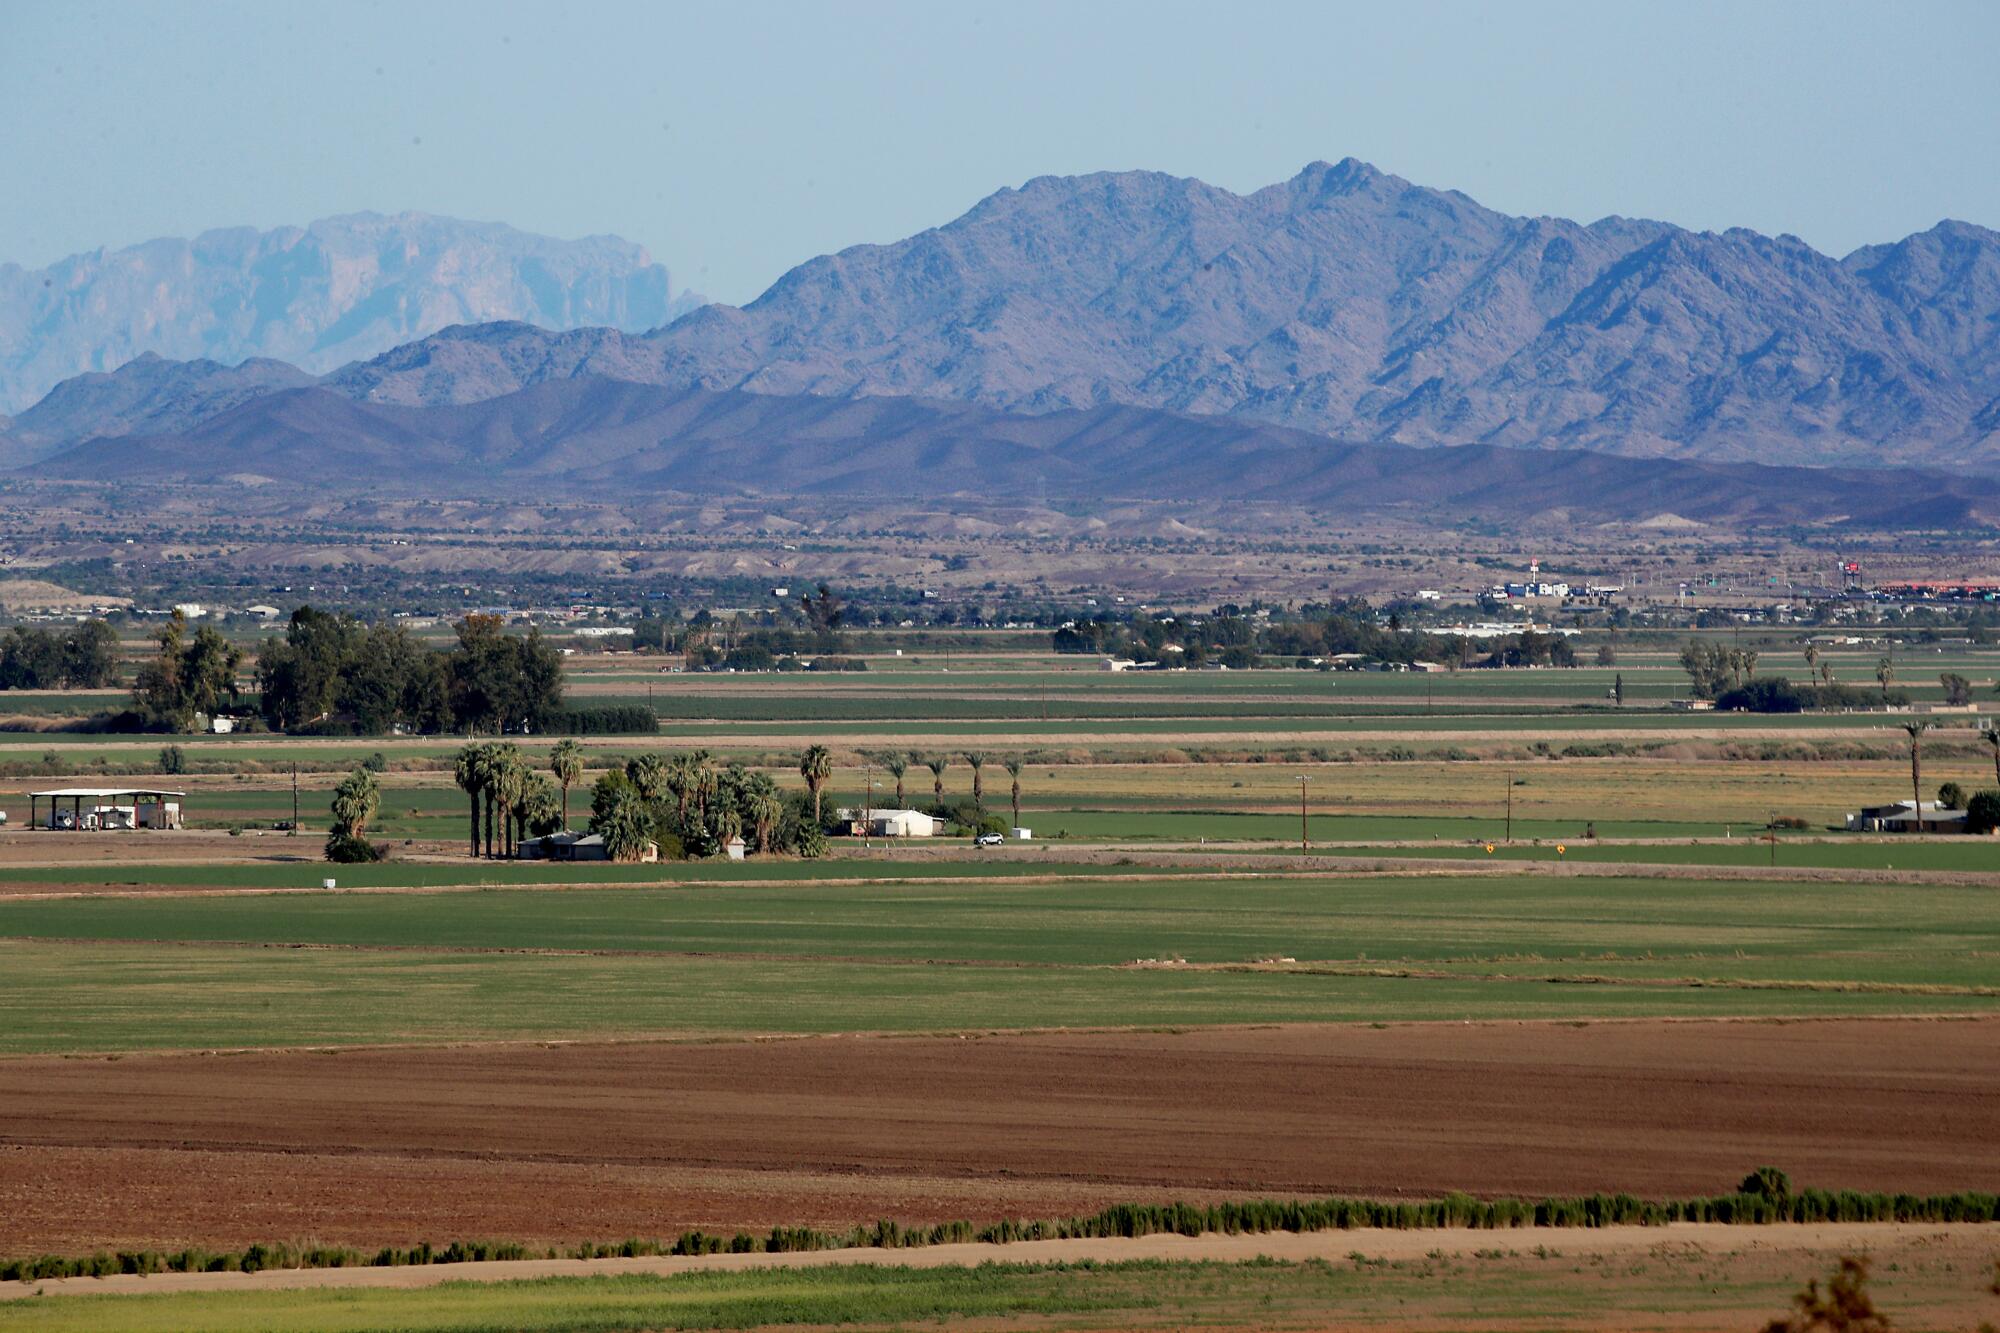 Agricultural fields lie across the Palo Verde Valley in Blythe, Calif.